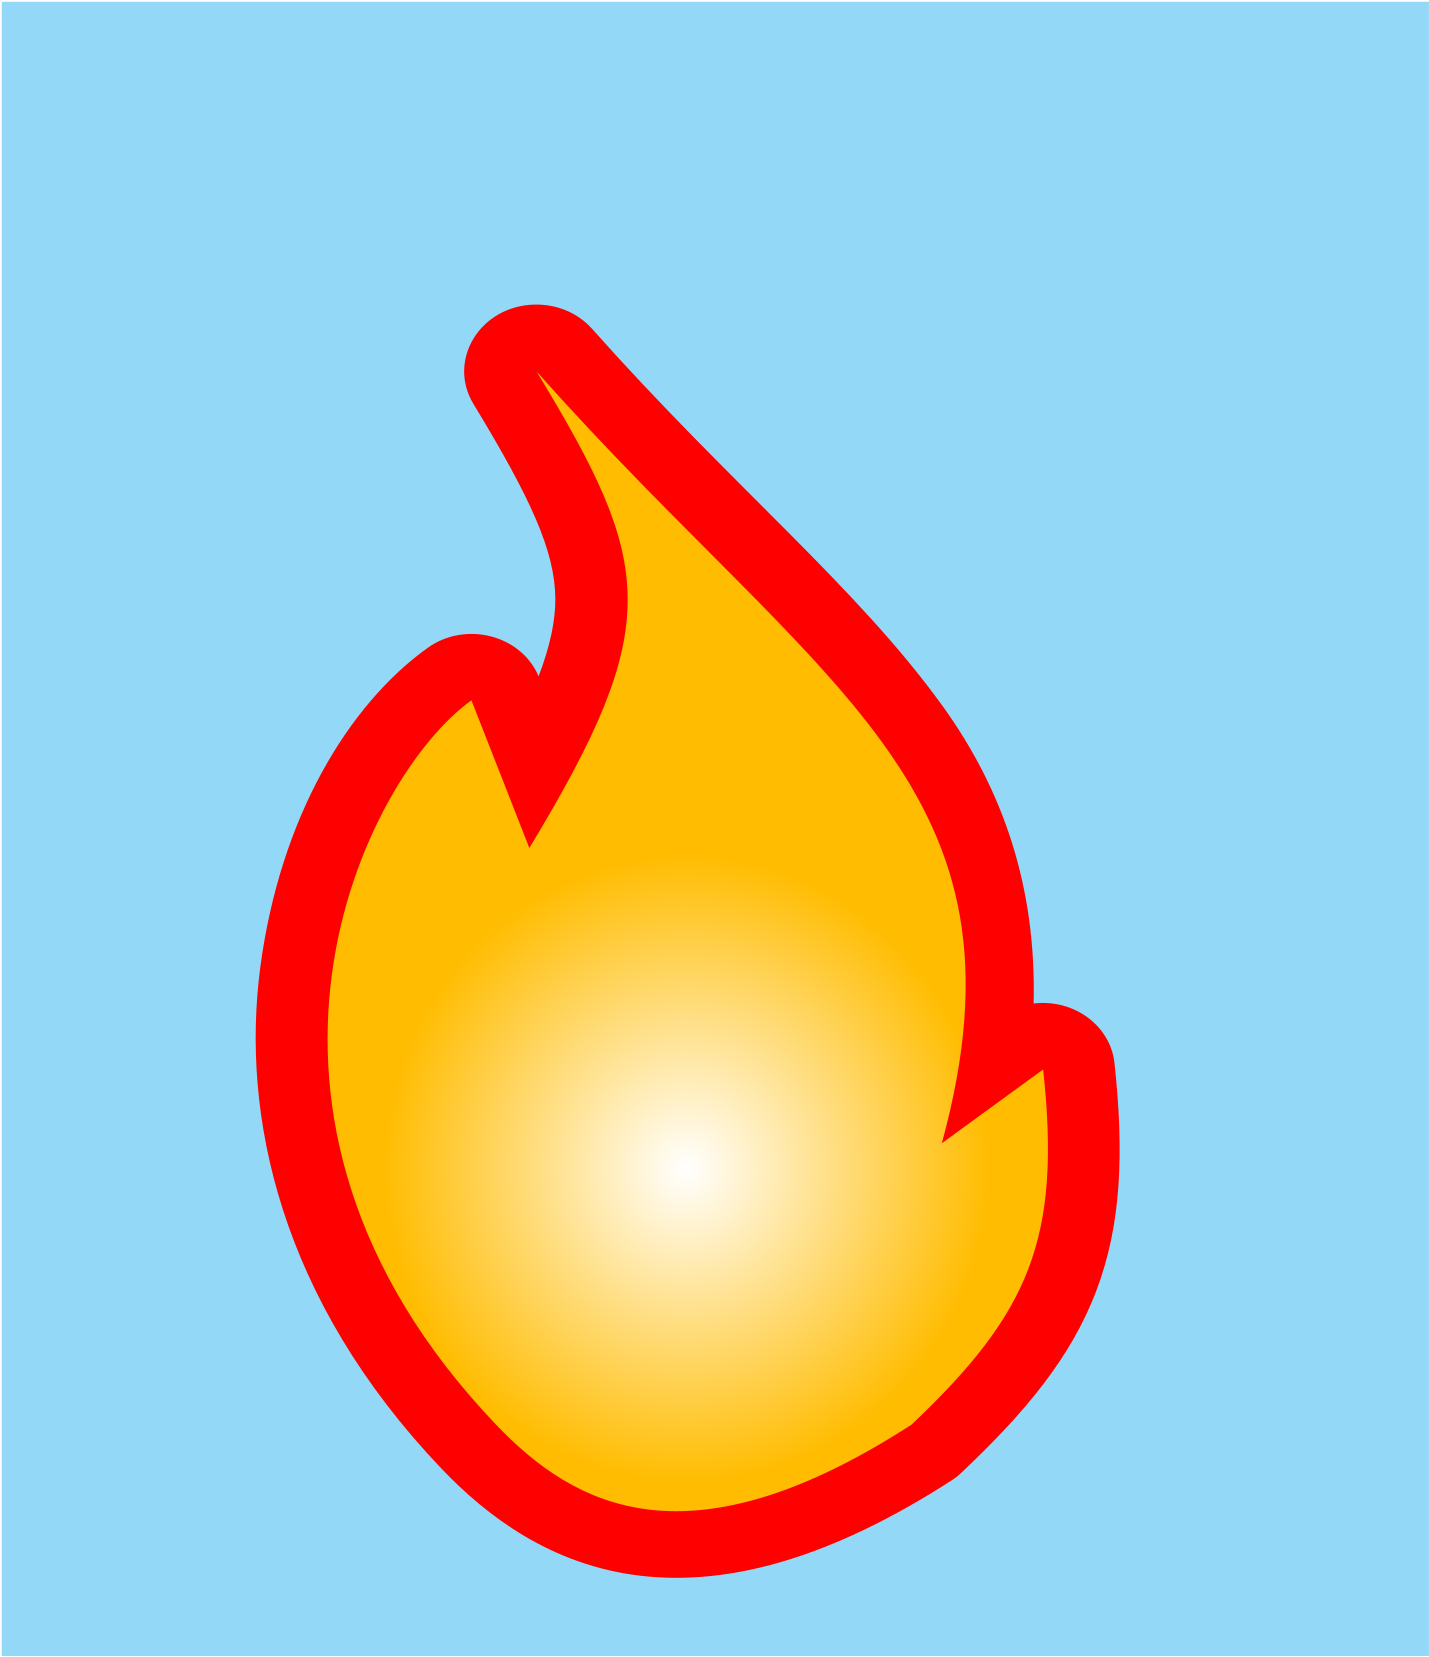 Flame Clipart Animated - Flame Clipart Animations (2400x2400)